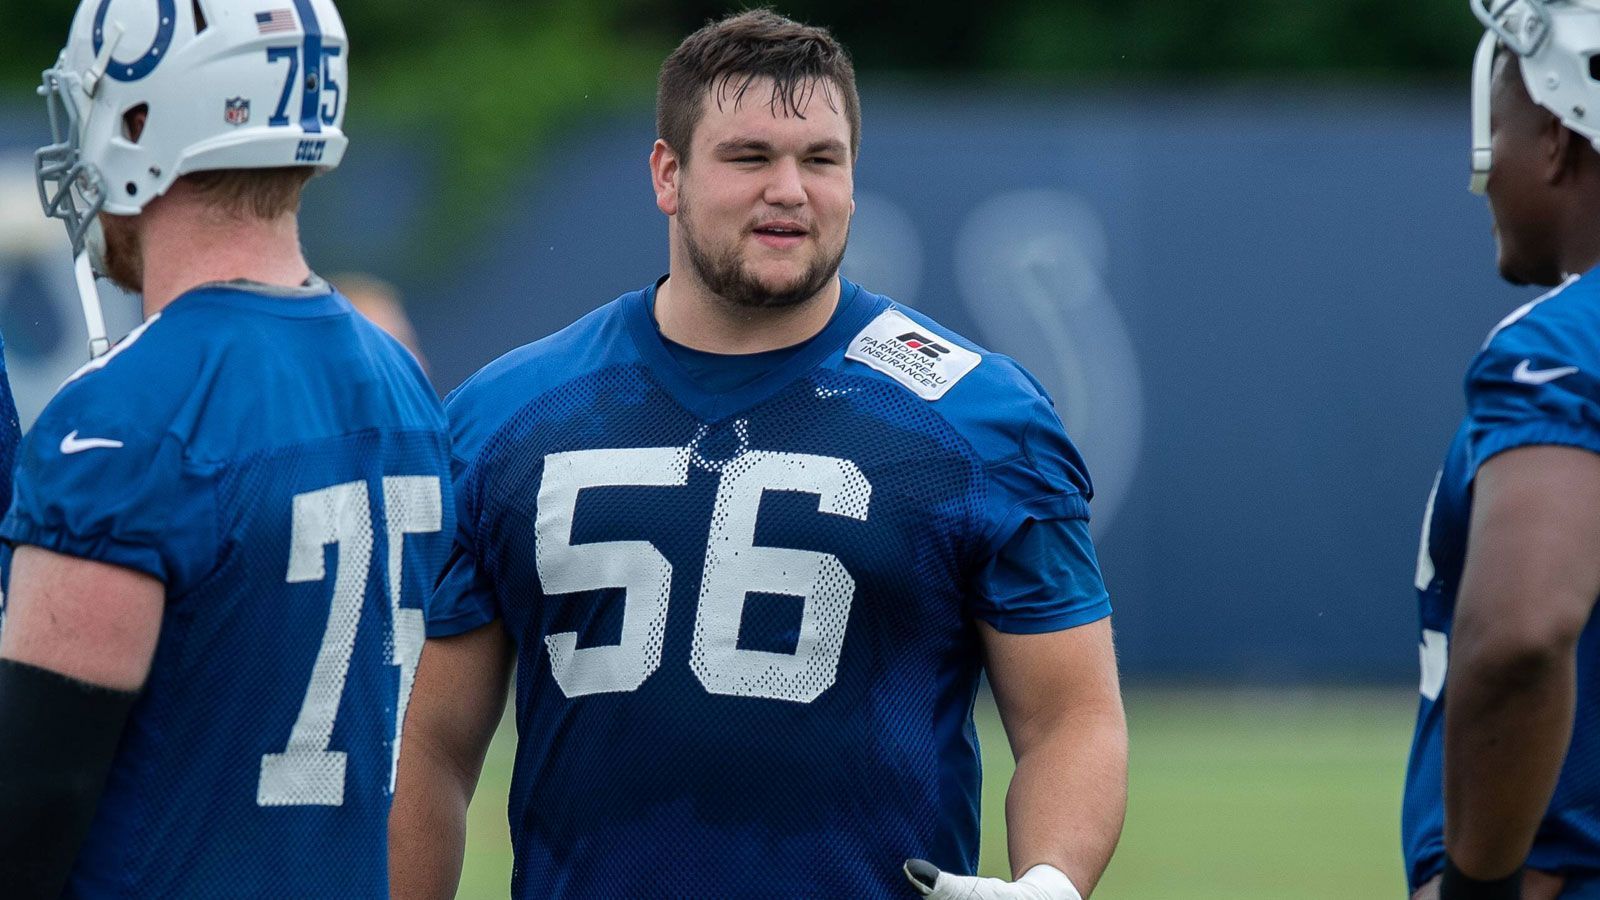 
                <strong>Die Top 5 Rookies in Madden 19</strong><br>
                Platz 1: Quenton Nelson, Guard, Indianapolis Colts: 83
              